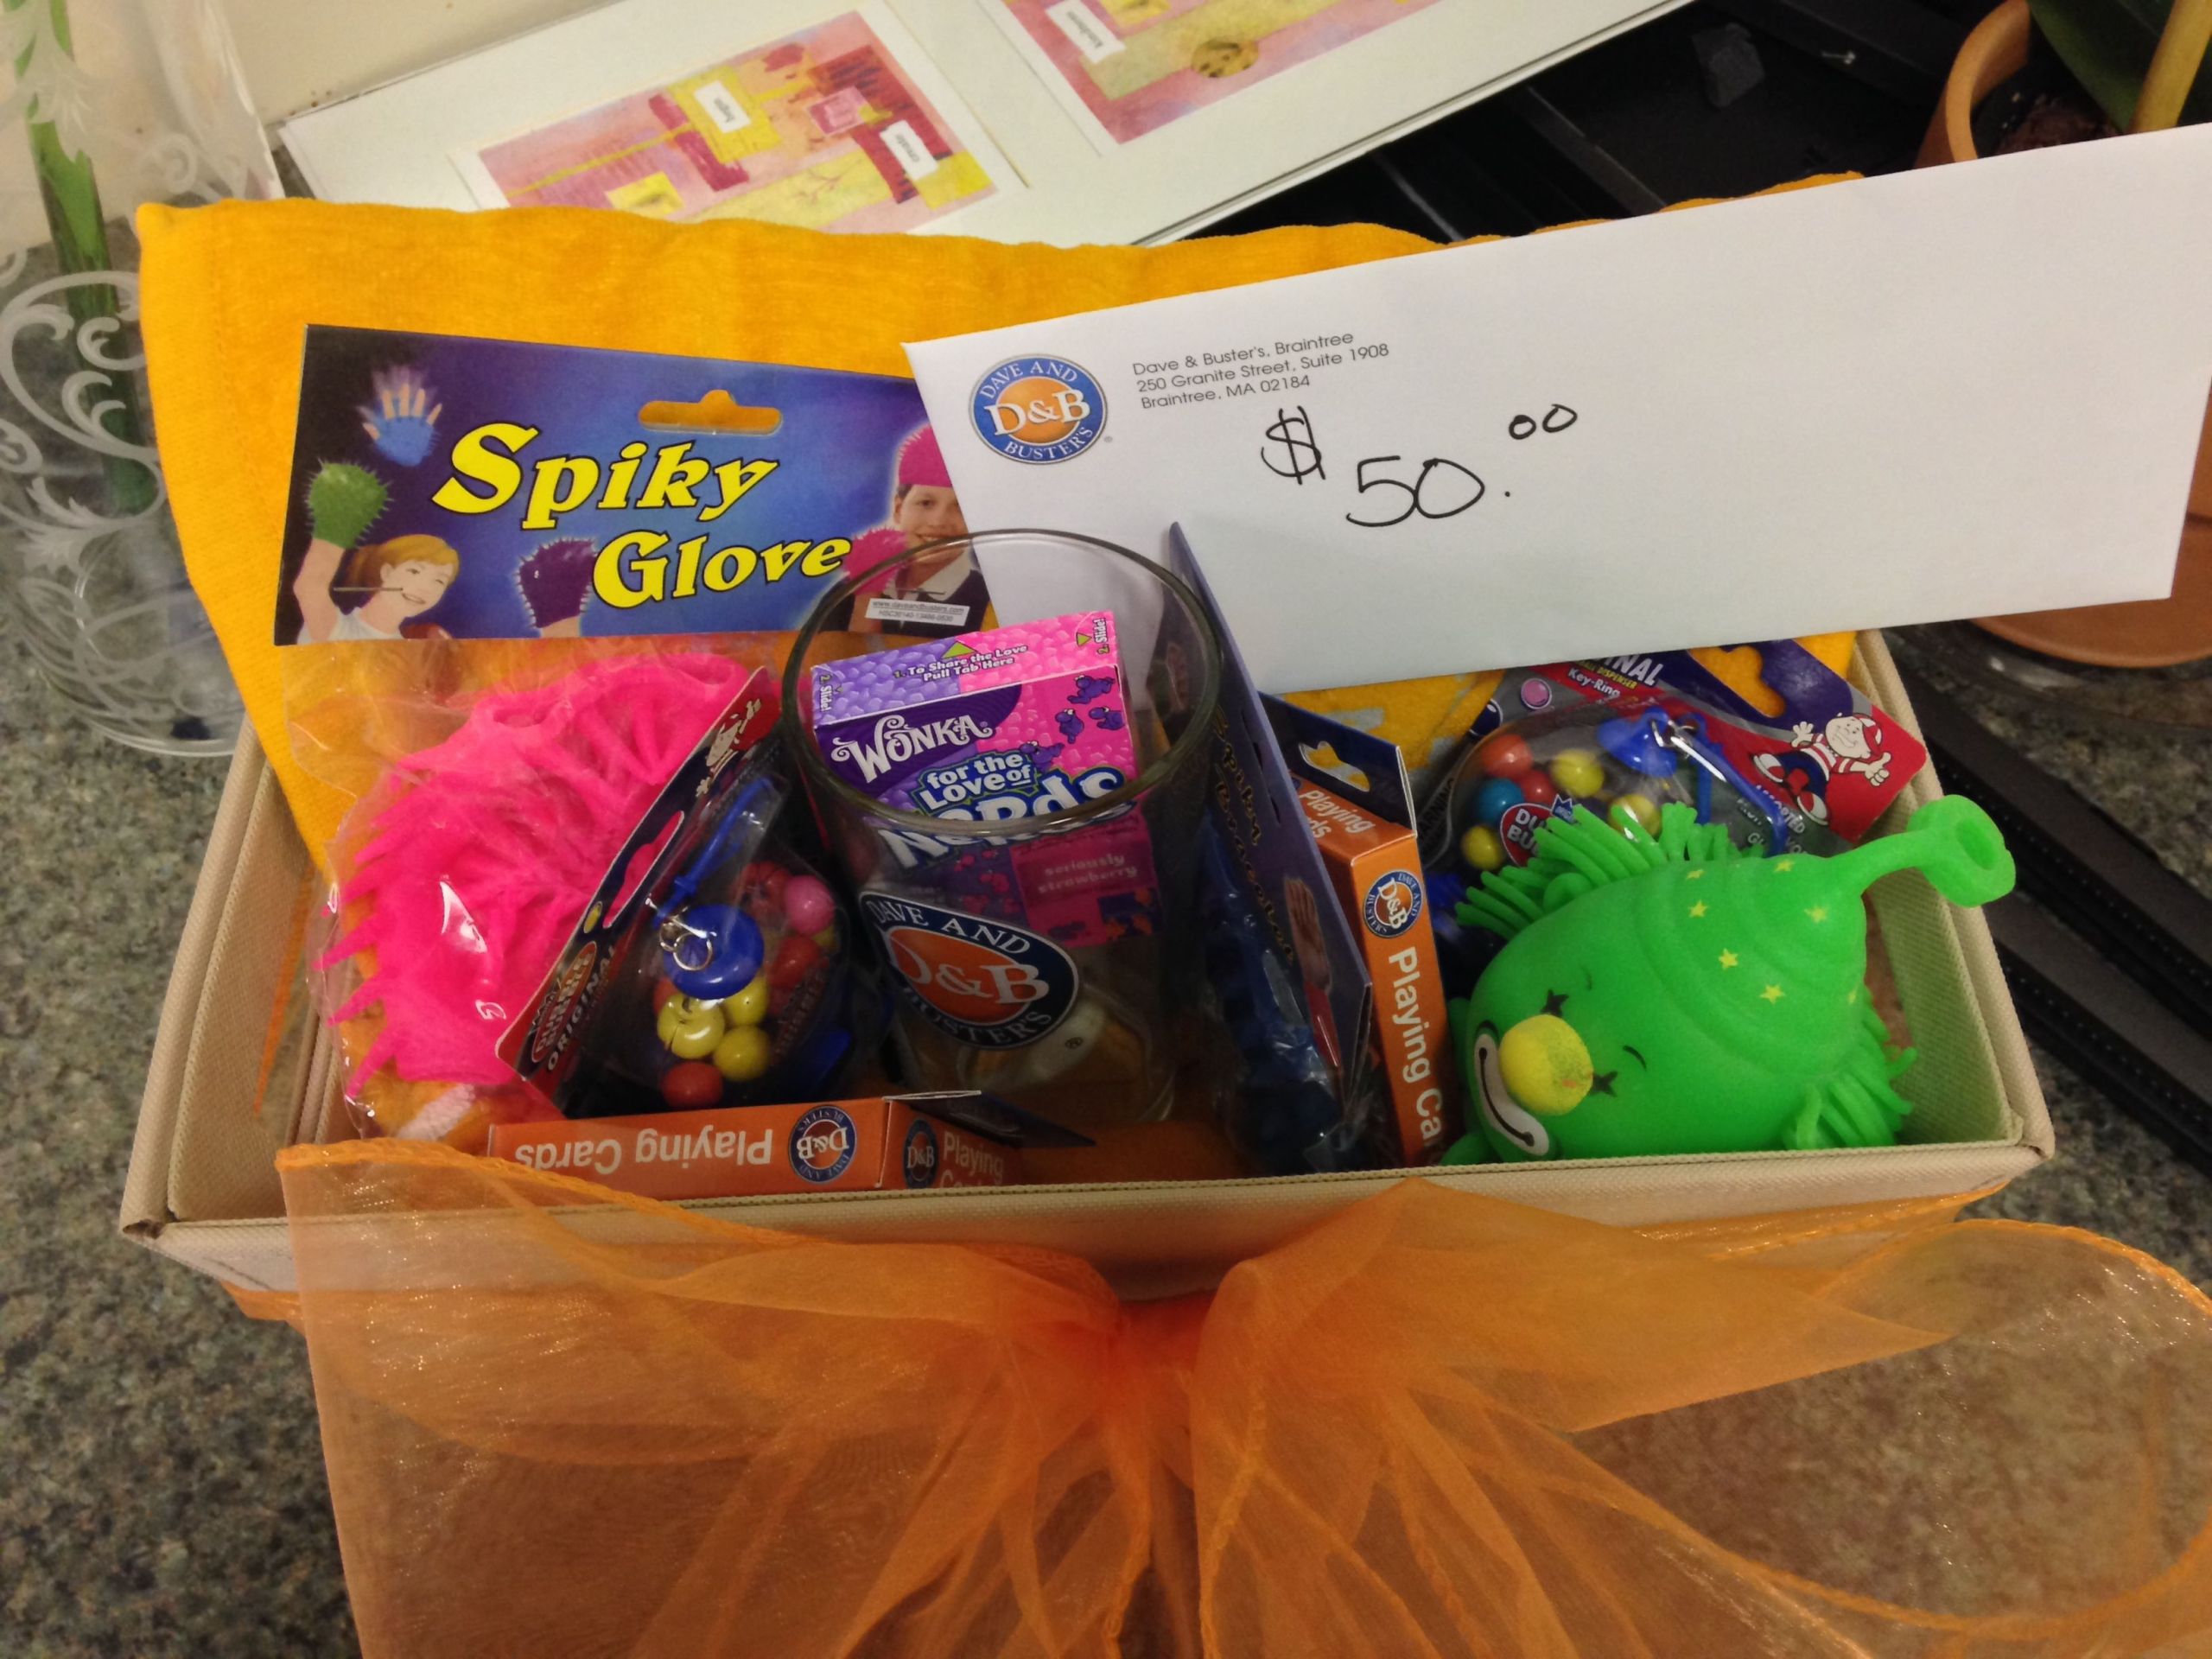 $50 Gift Basket Ideas
 Dave & Busters Gift Basket gives you fun little prizes and